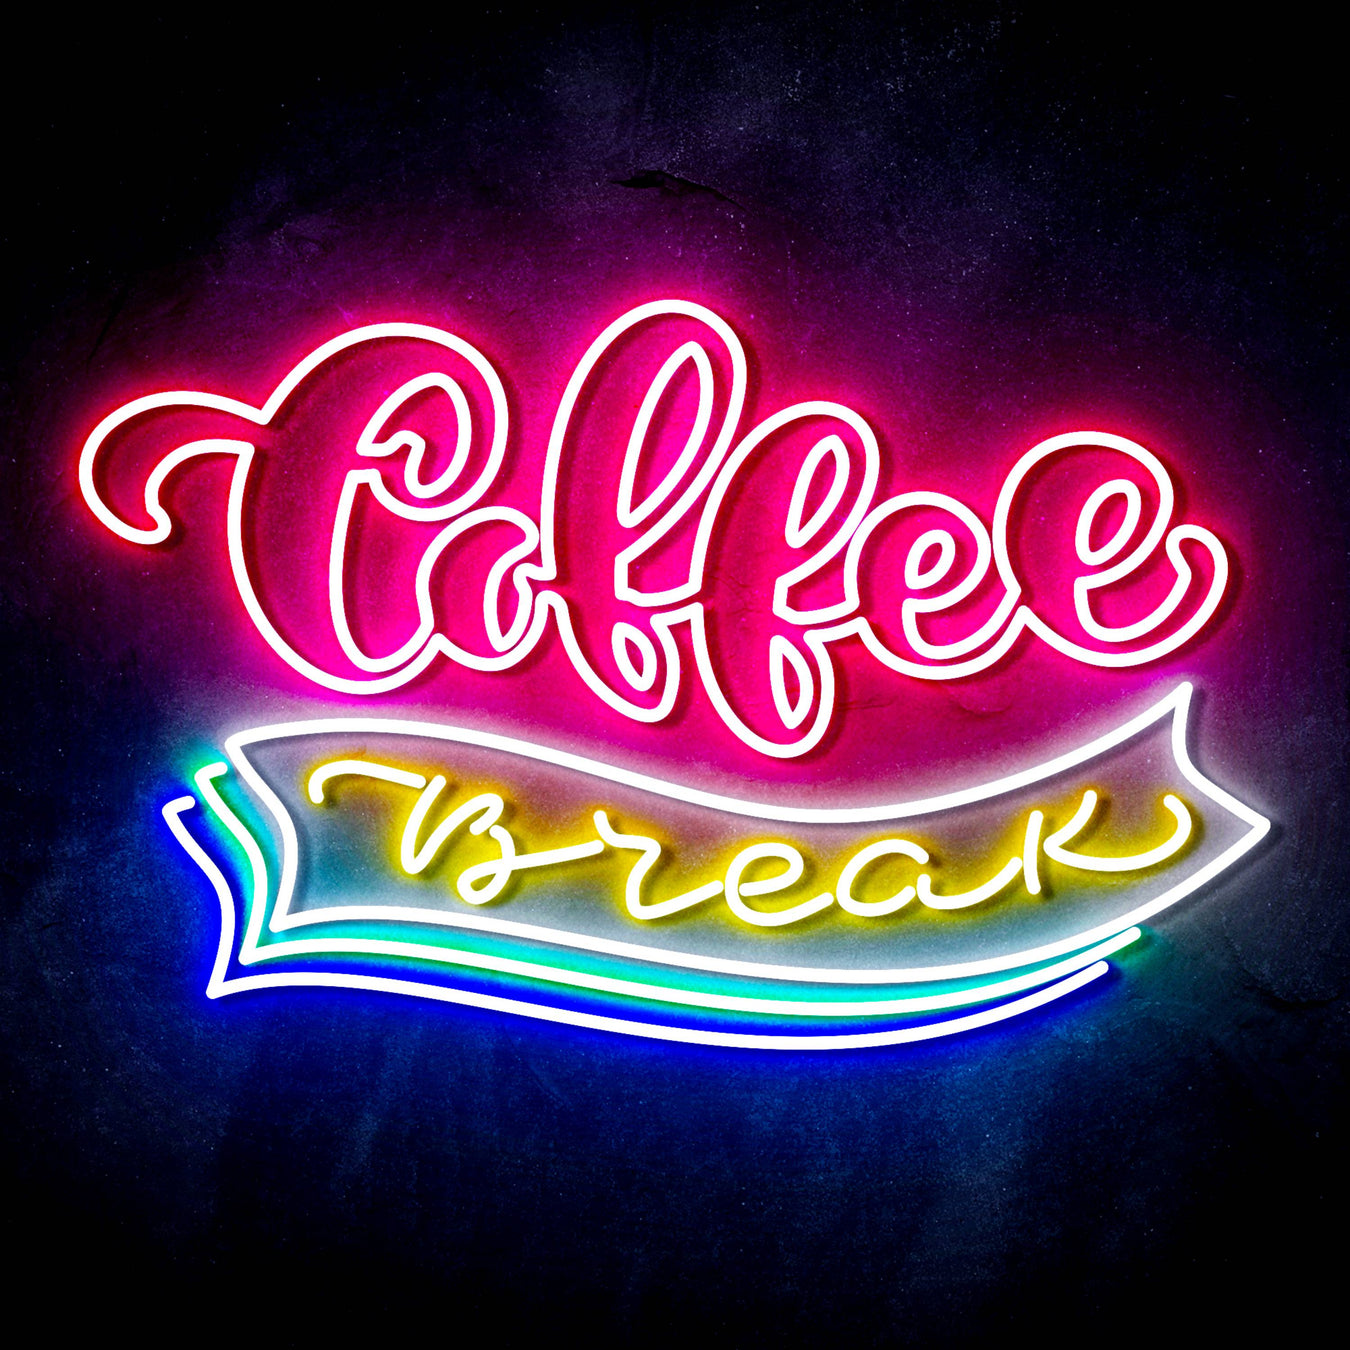 Coffee and Cafe Ultra-Bright LED Neon Signs